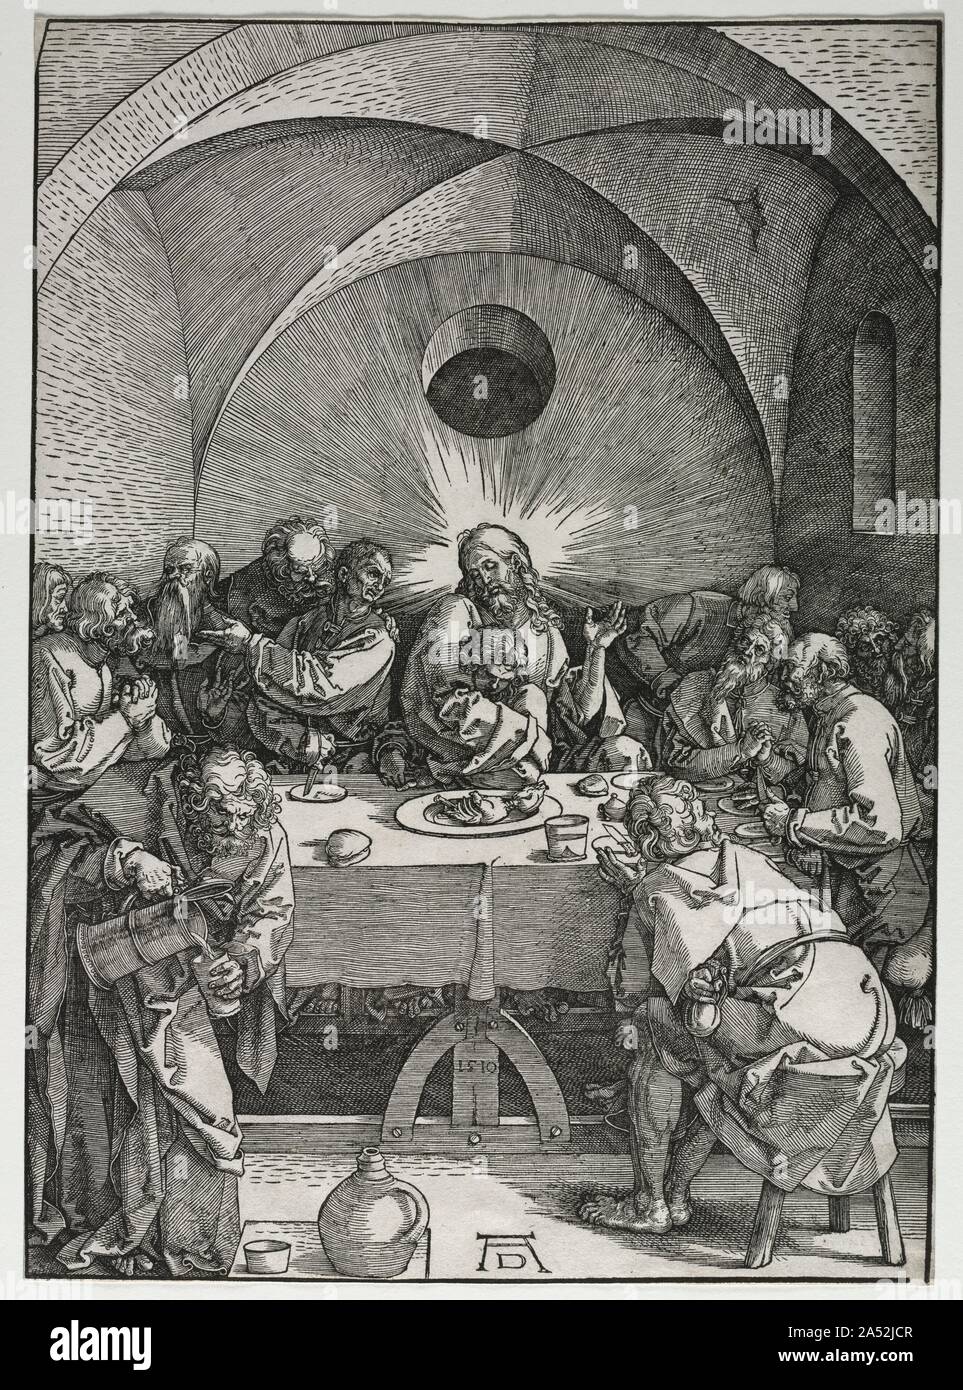 The Large Passion: The Last Supper, 1510. Two distinct styles are evident in the scenes of  The Large Passion  designed before 1500 and those made 10 years later, after D&#xfc;rer's second journey to Venice. While the effect of the early scenes relies on using line, those executed after 1500 depend on tonal contrasts. D&#xfc;rer expanded the number of tones from black and white to a range of grays by using parallel hatchings and by varying the widths of lines and the spaces between them. Areas of white paper seem more or less bright depending on the density of black around them&#x2014;compare Stock Photo